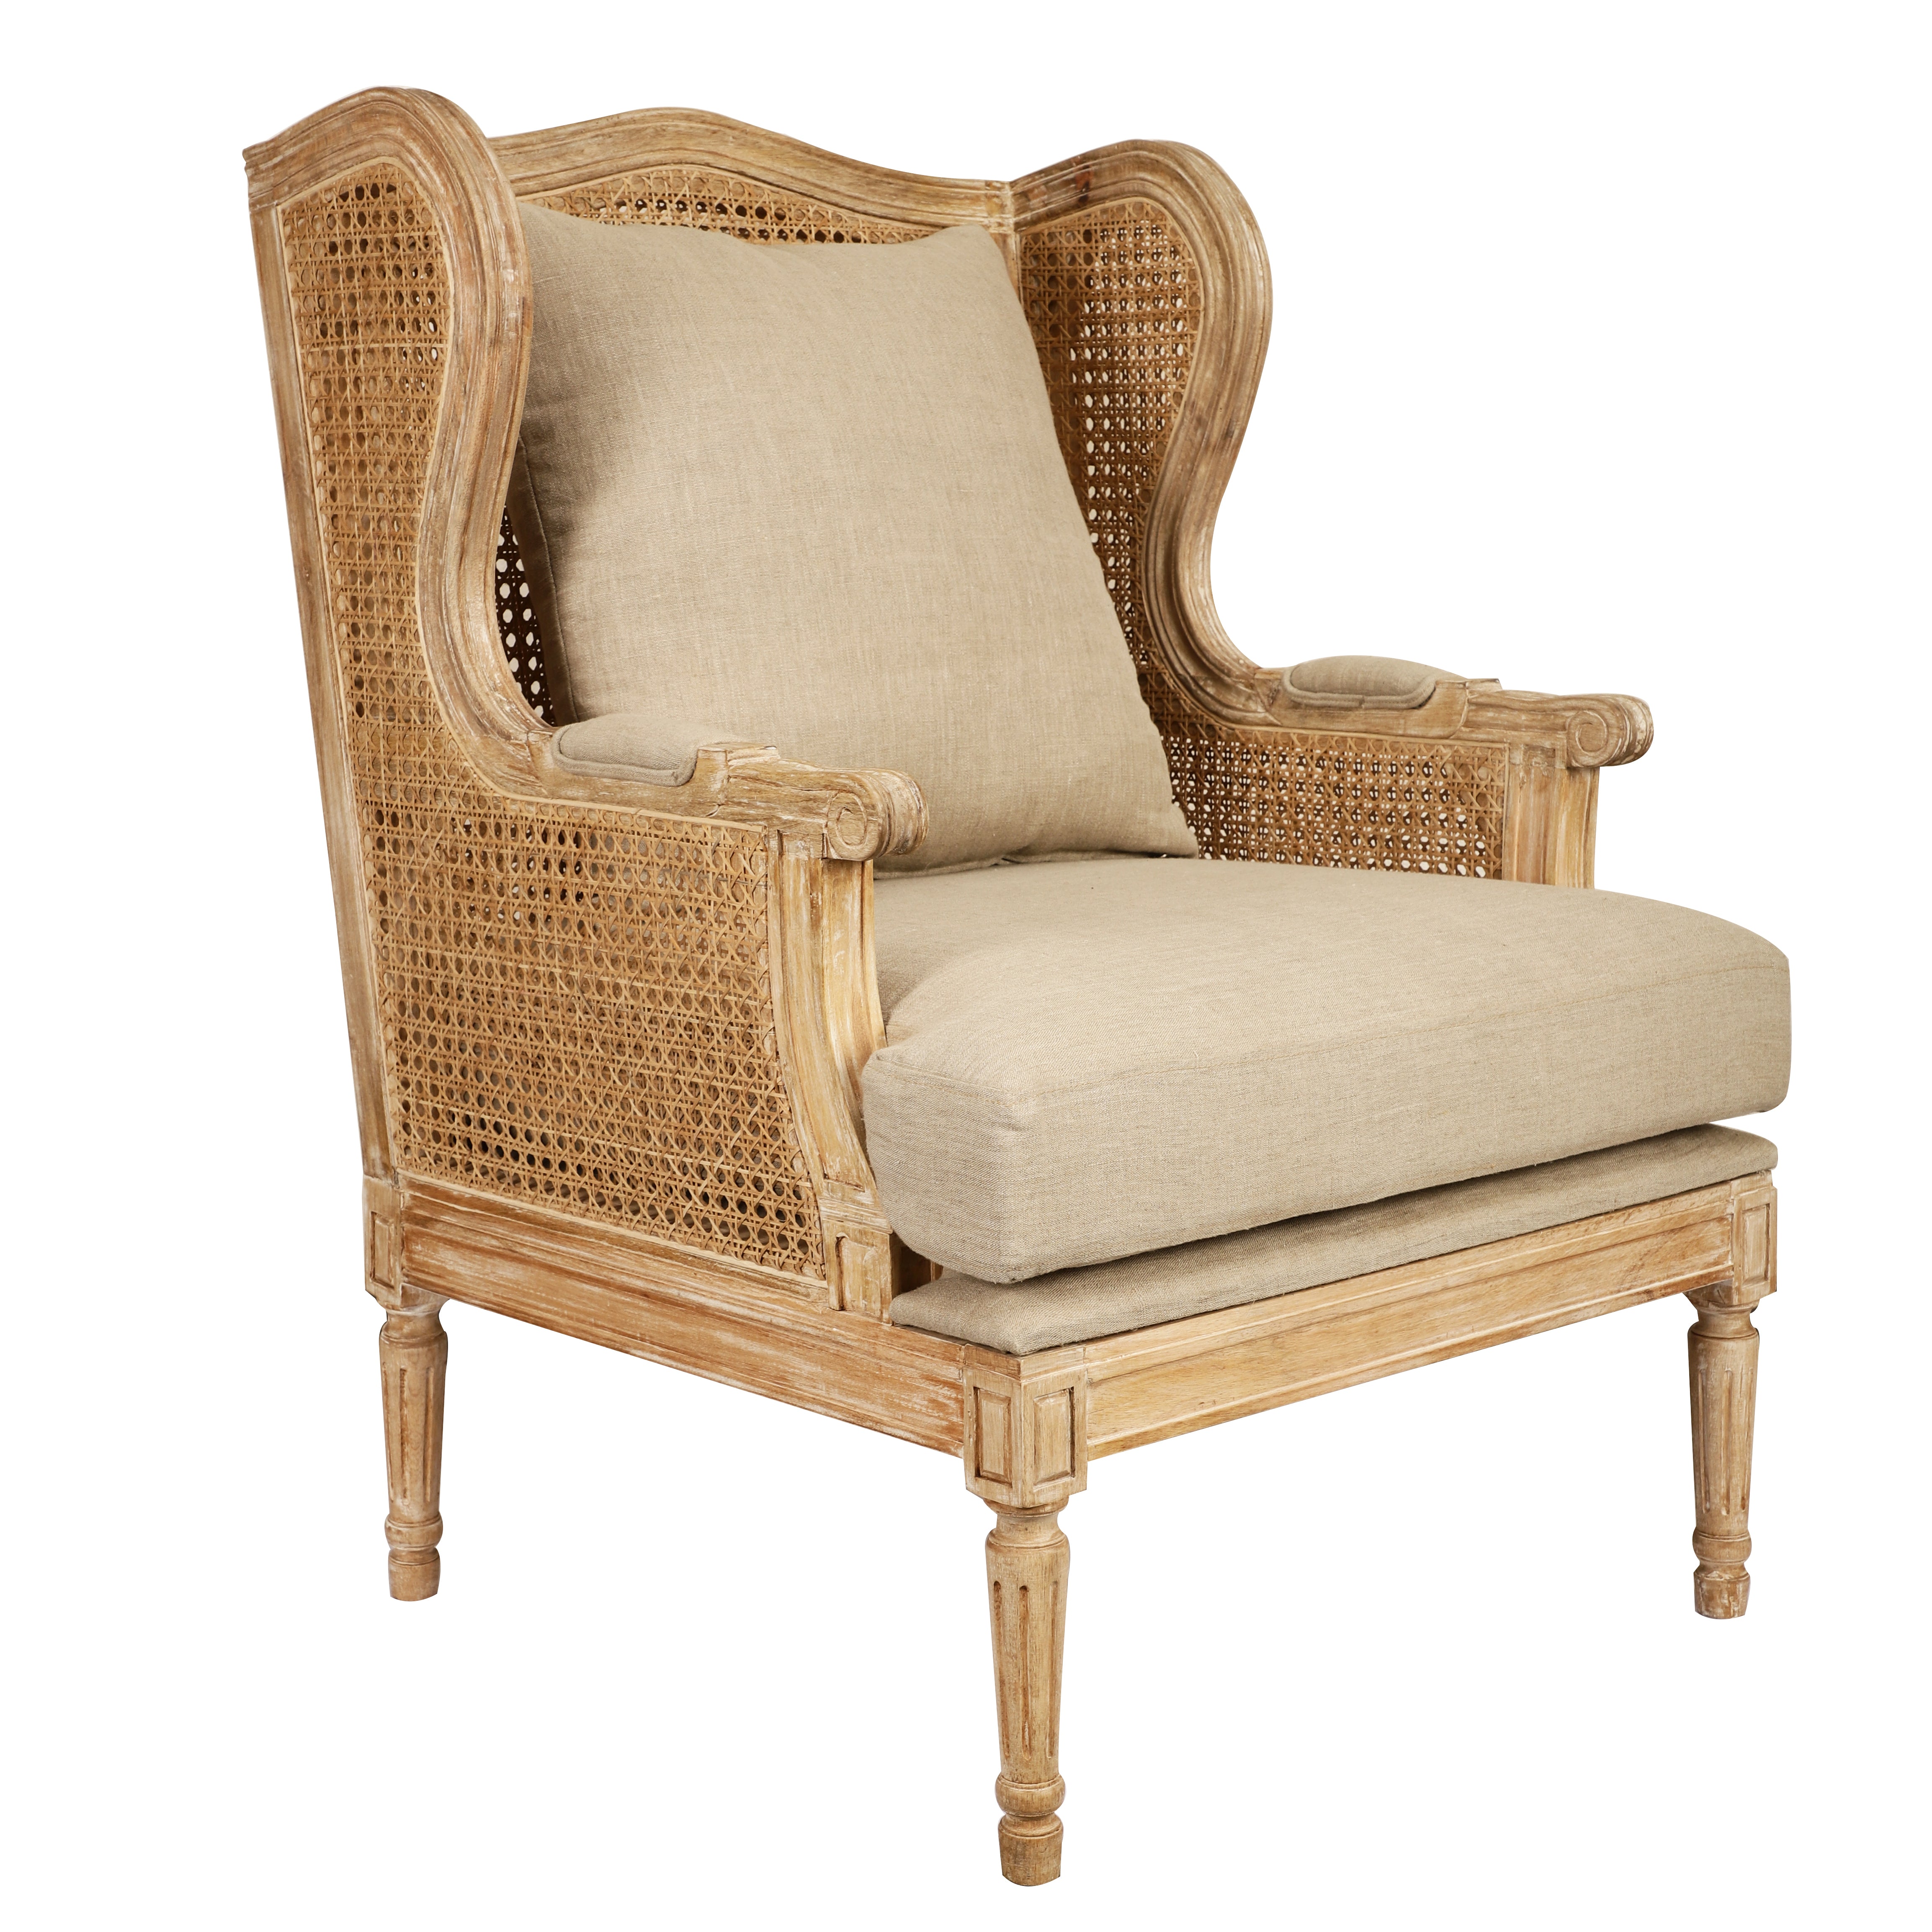 Cane Arm Chair and Ottoman